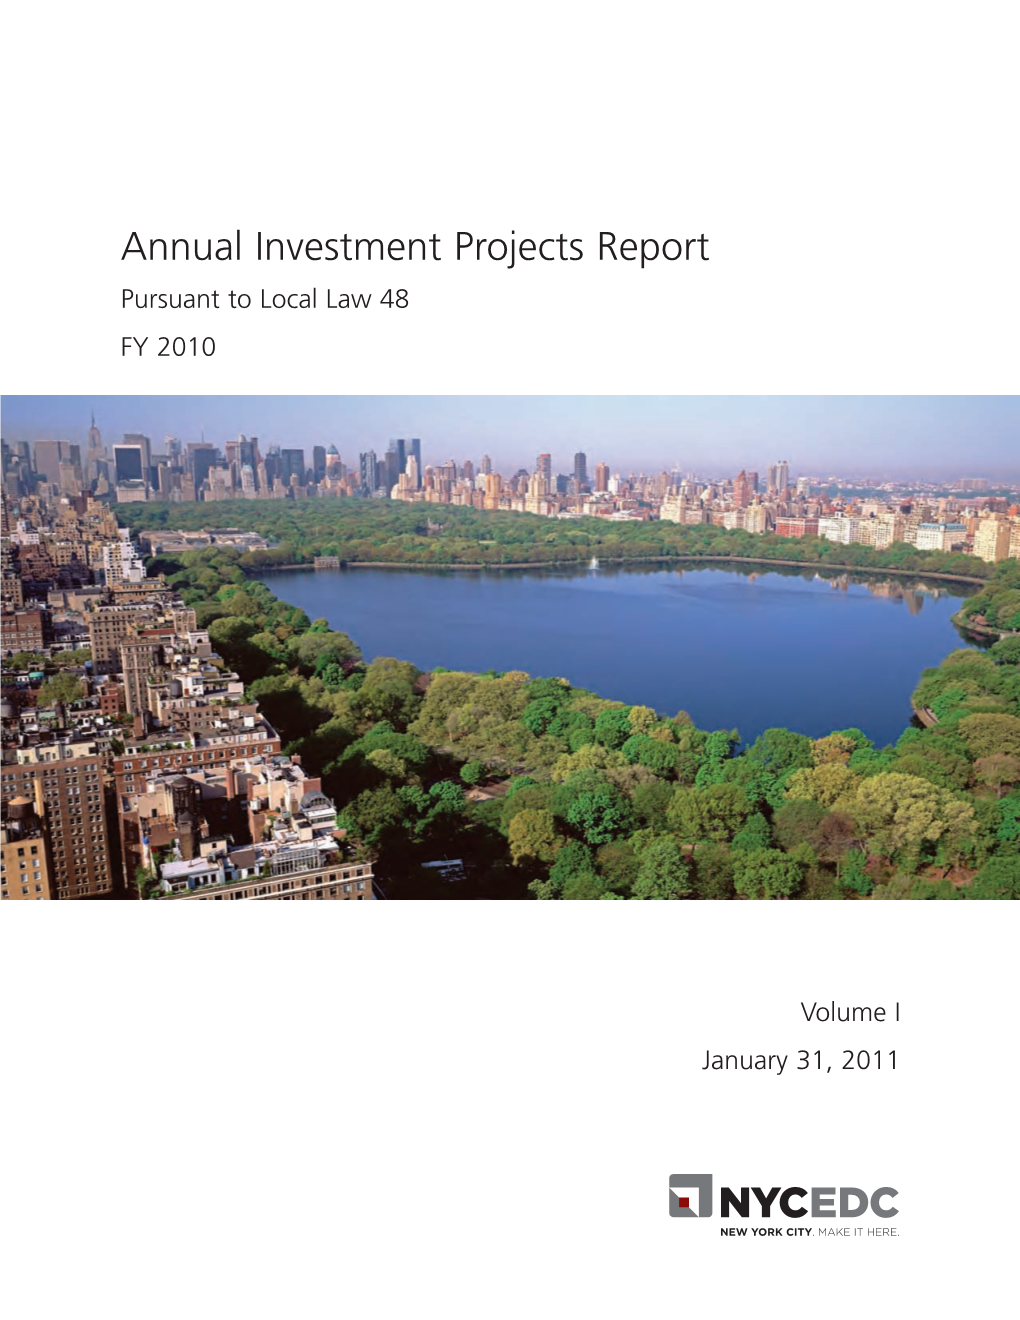 Annual Investment Projects Report FY 2010